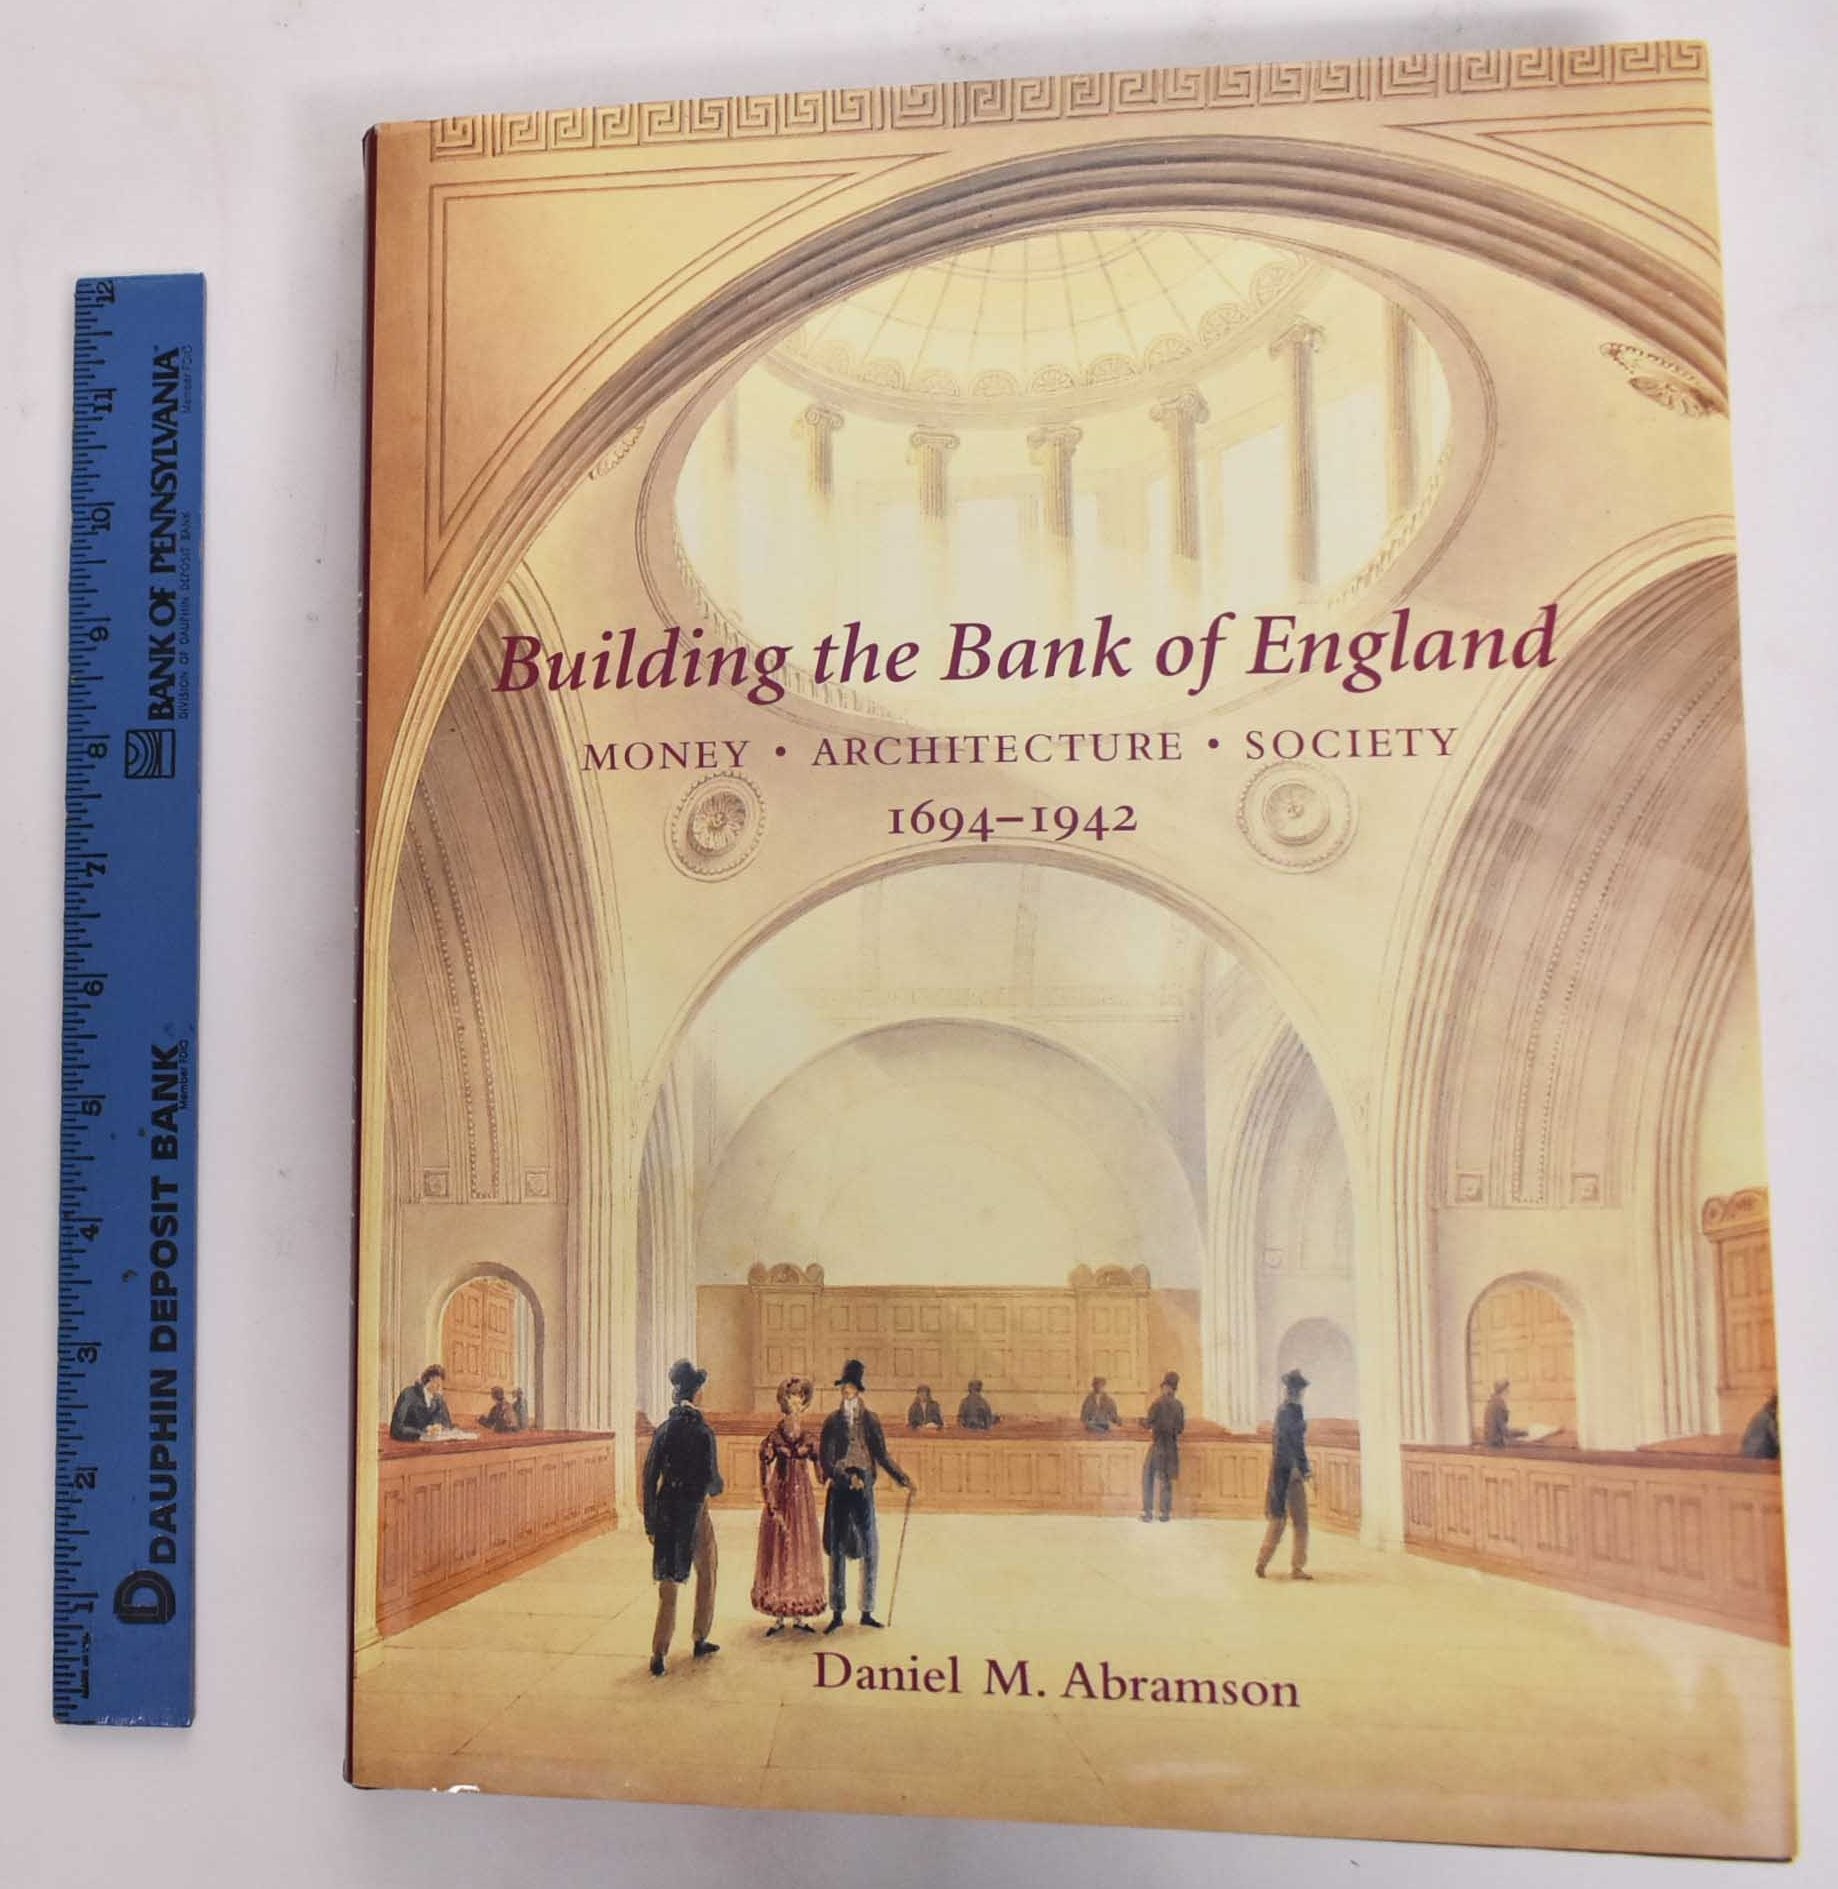 Abramson, Daniel M. - Building the Bank of England: Money, Architecture, Society 1694-1942